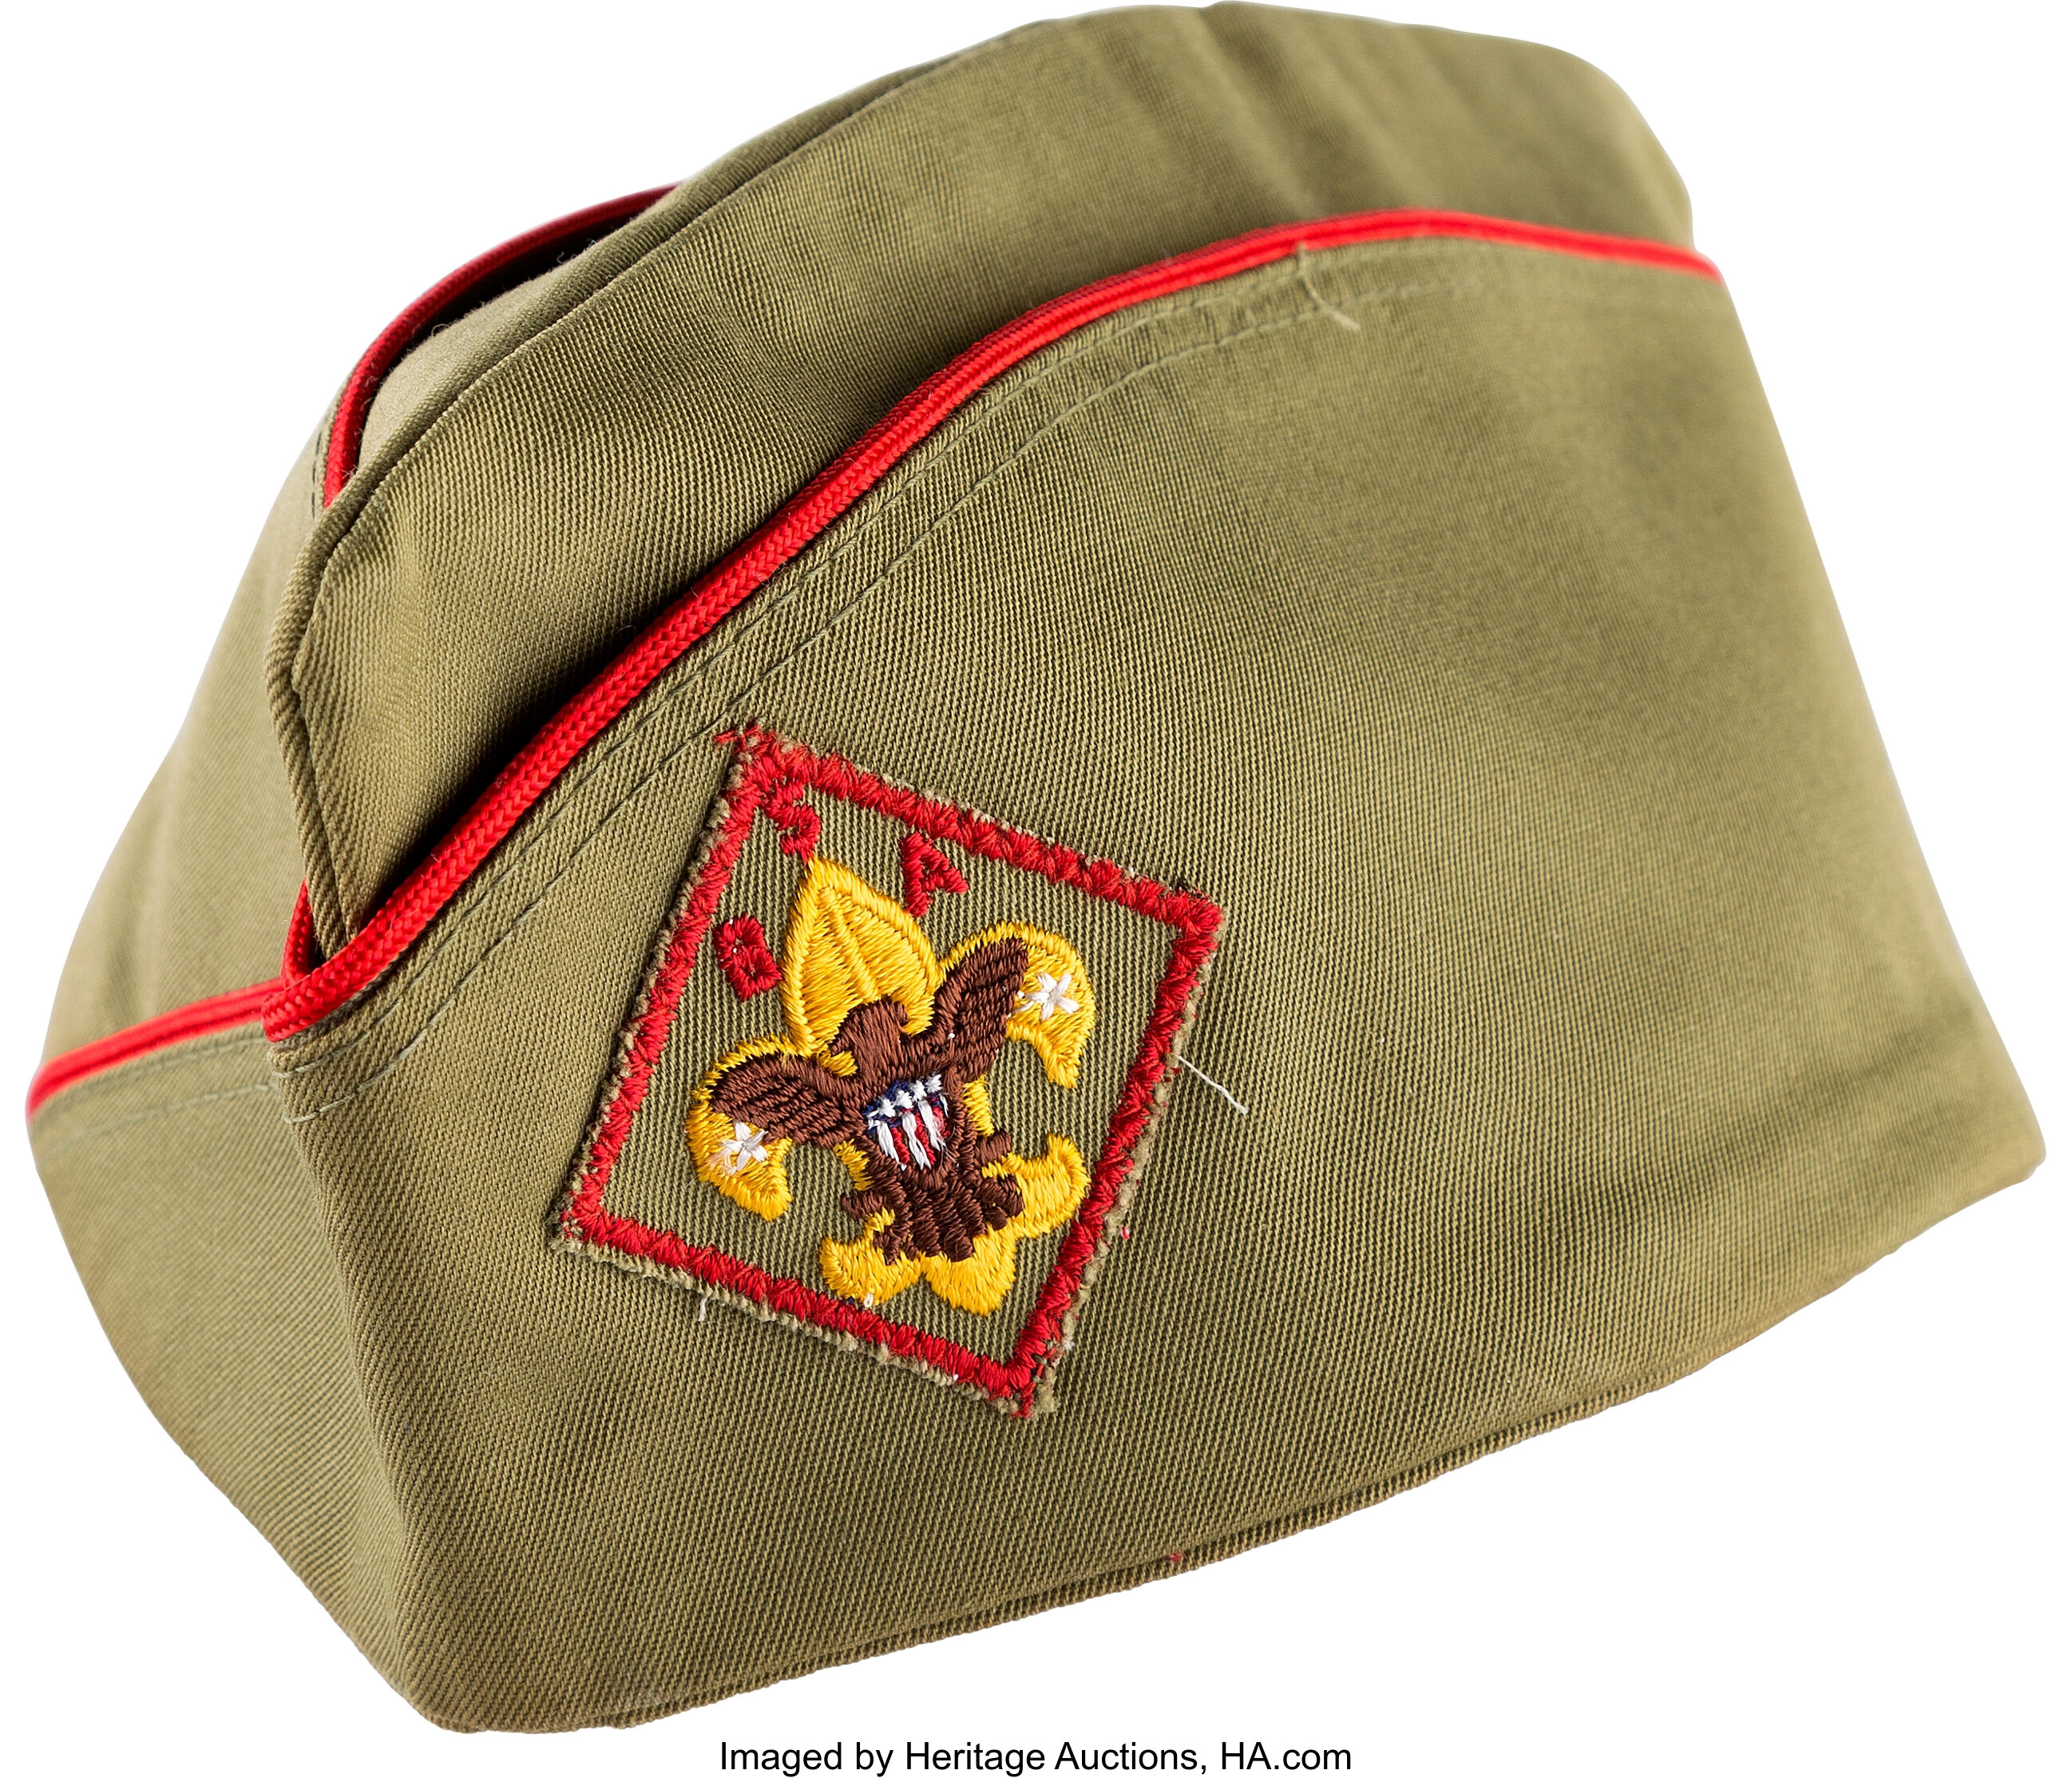 Boy Scouts: Garrison or Flat Field Hat Owned and Worn by Neil